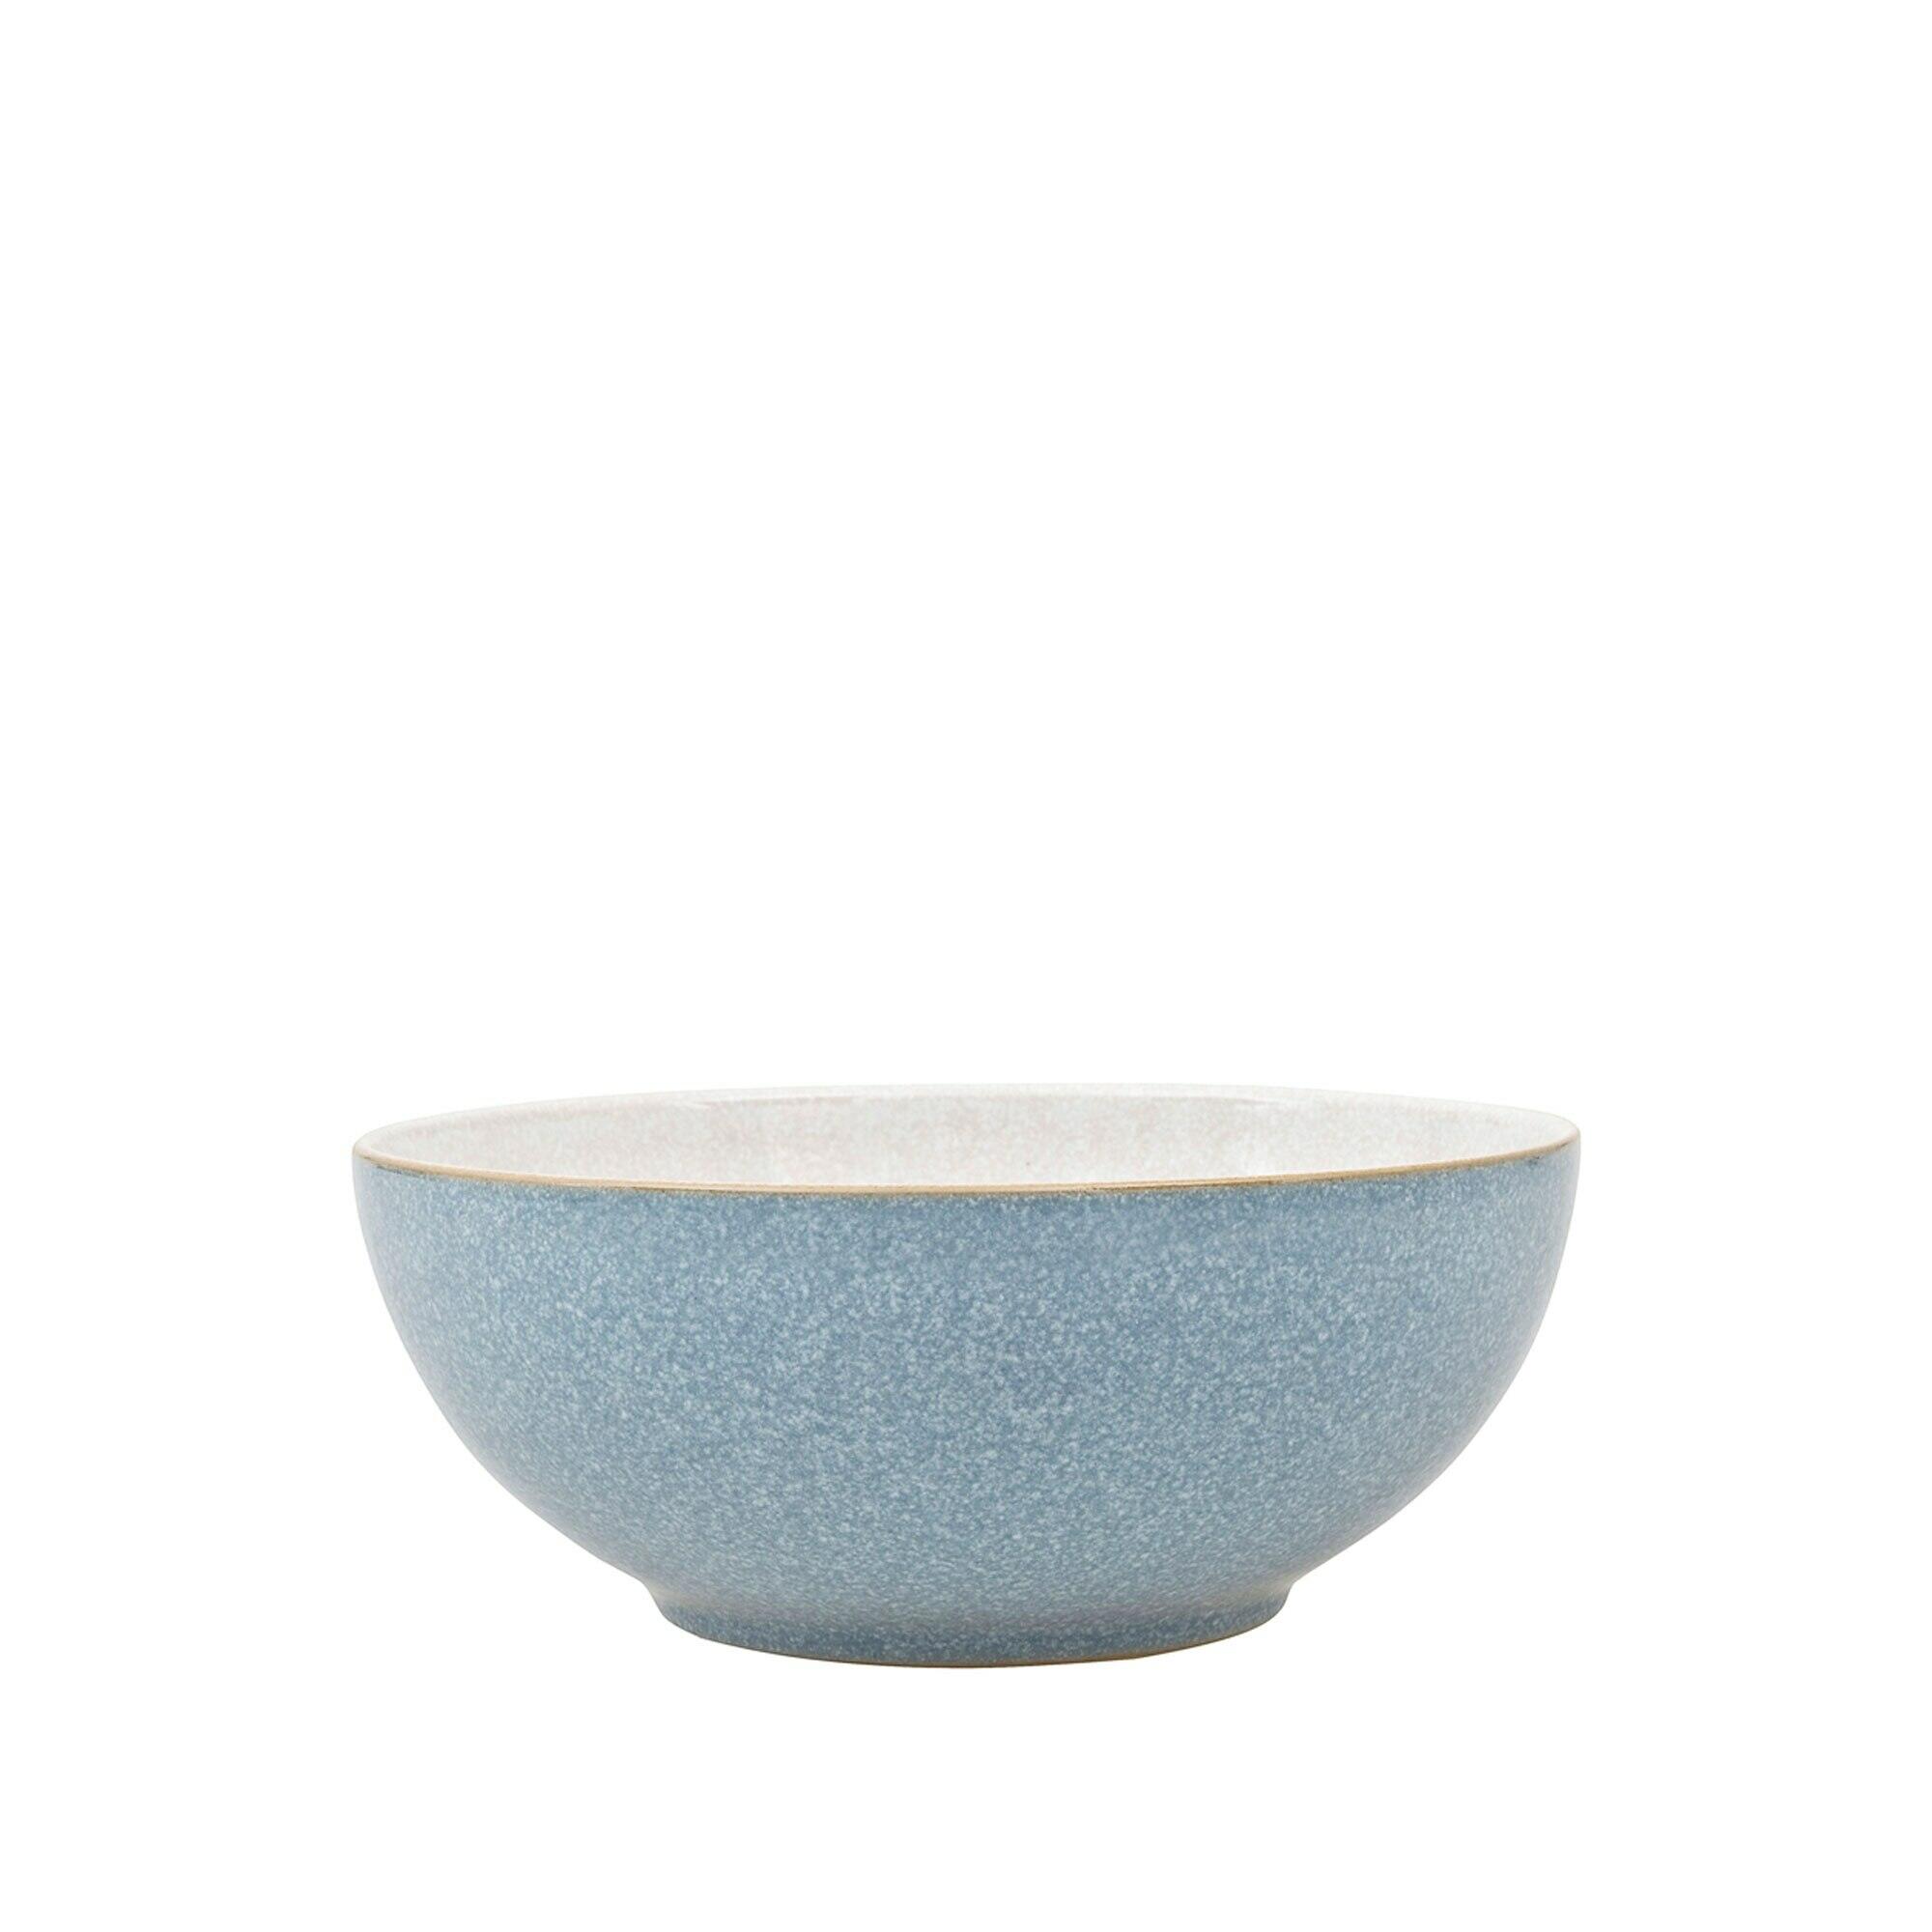 Elements Blue Coupe Cereal Bowl